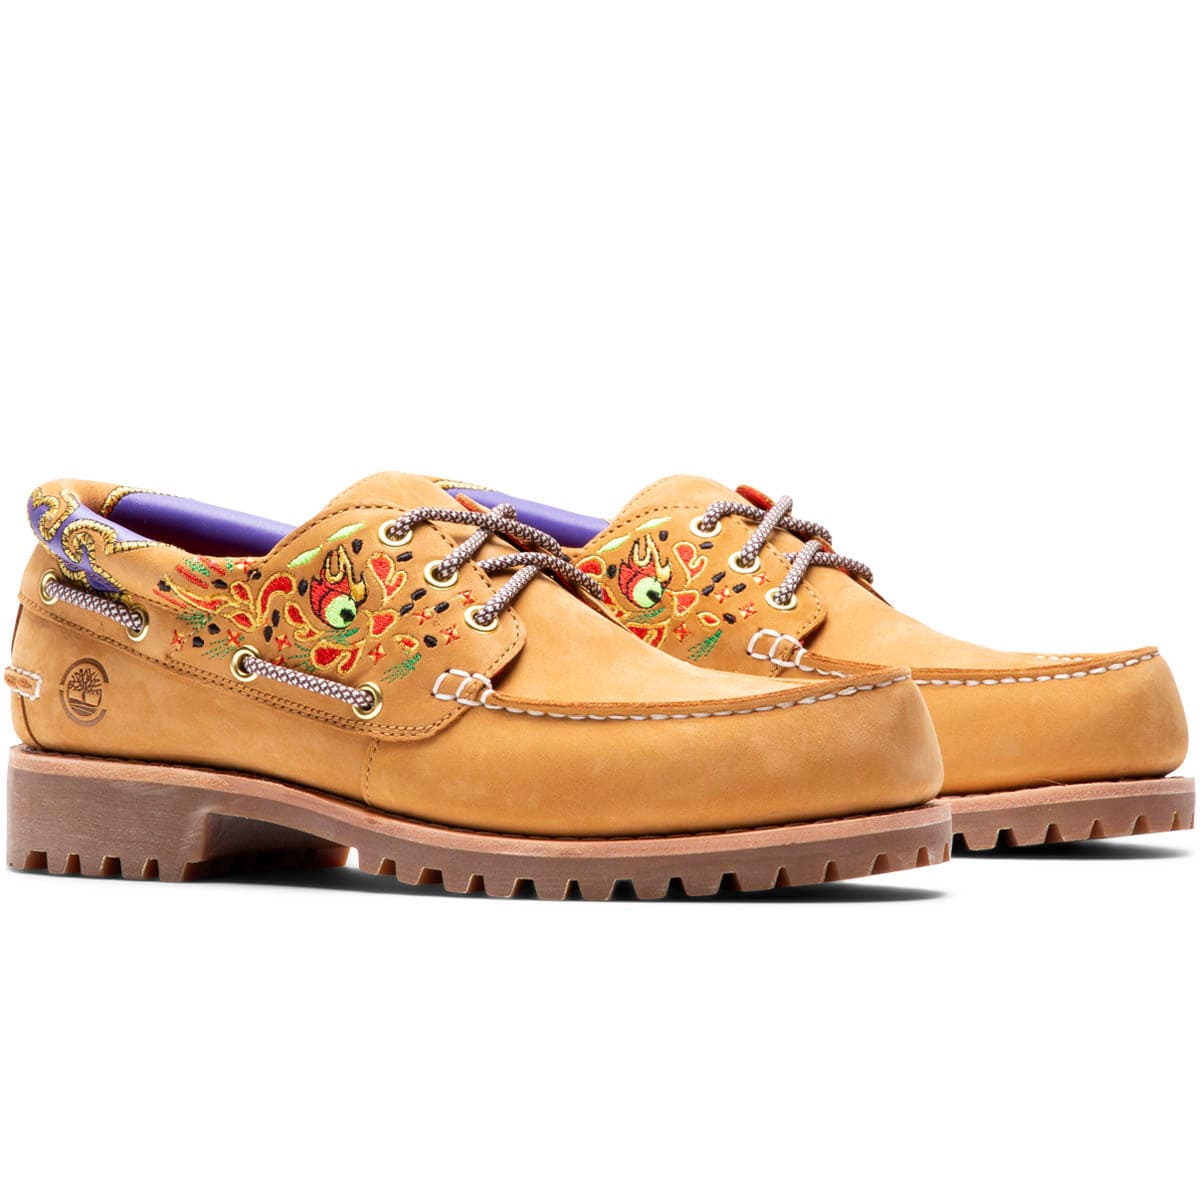 Supreme Timberland Woven Loafers